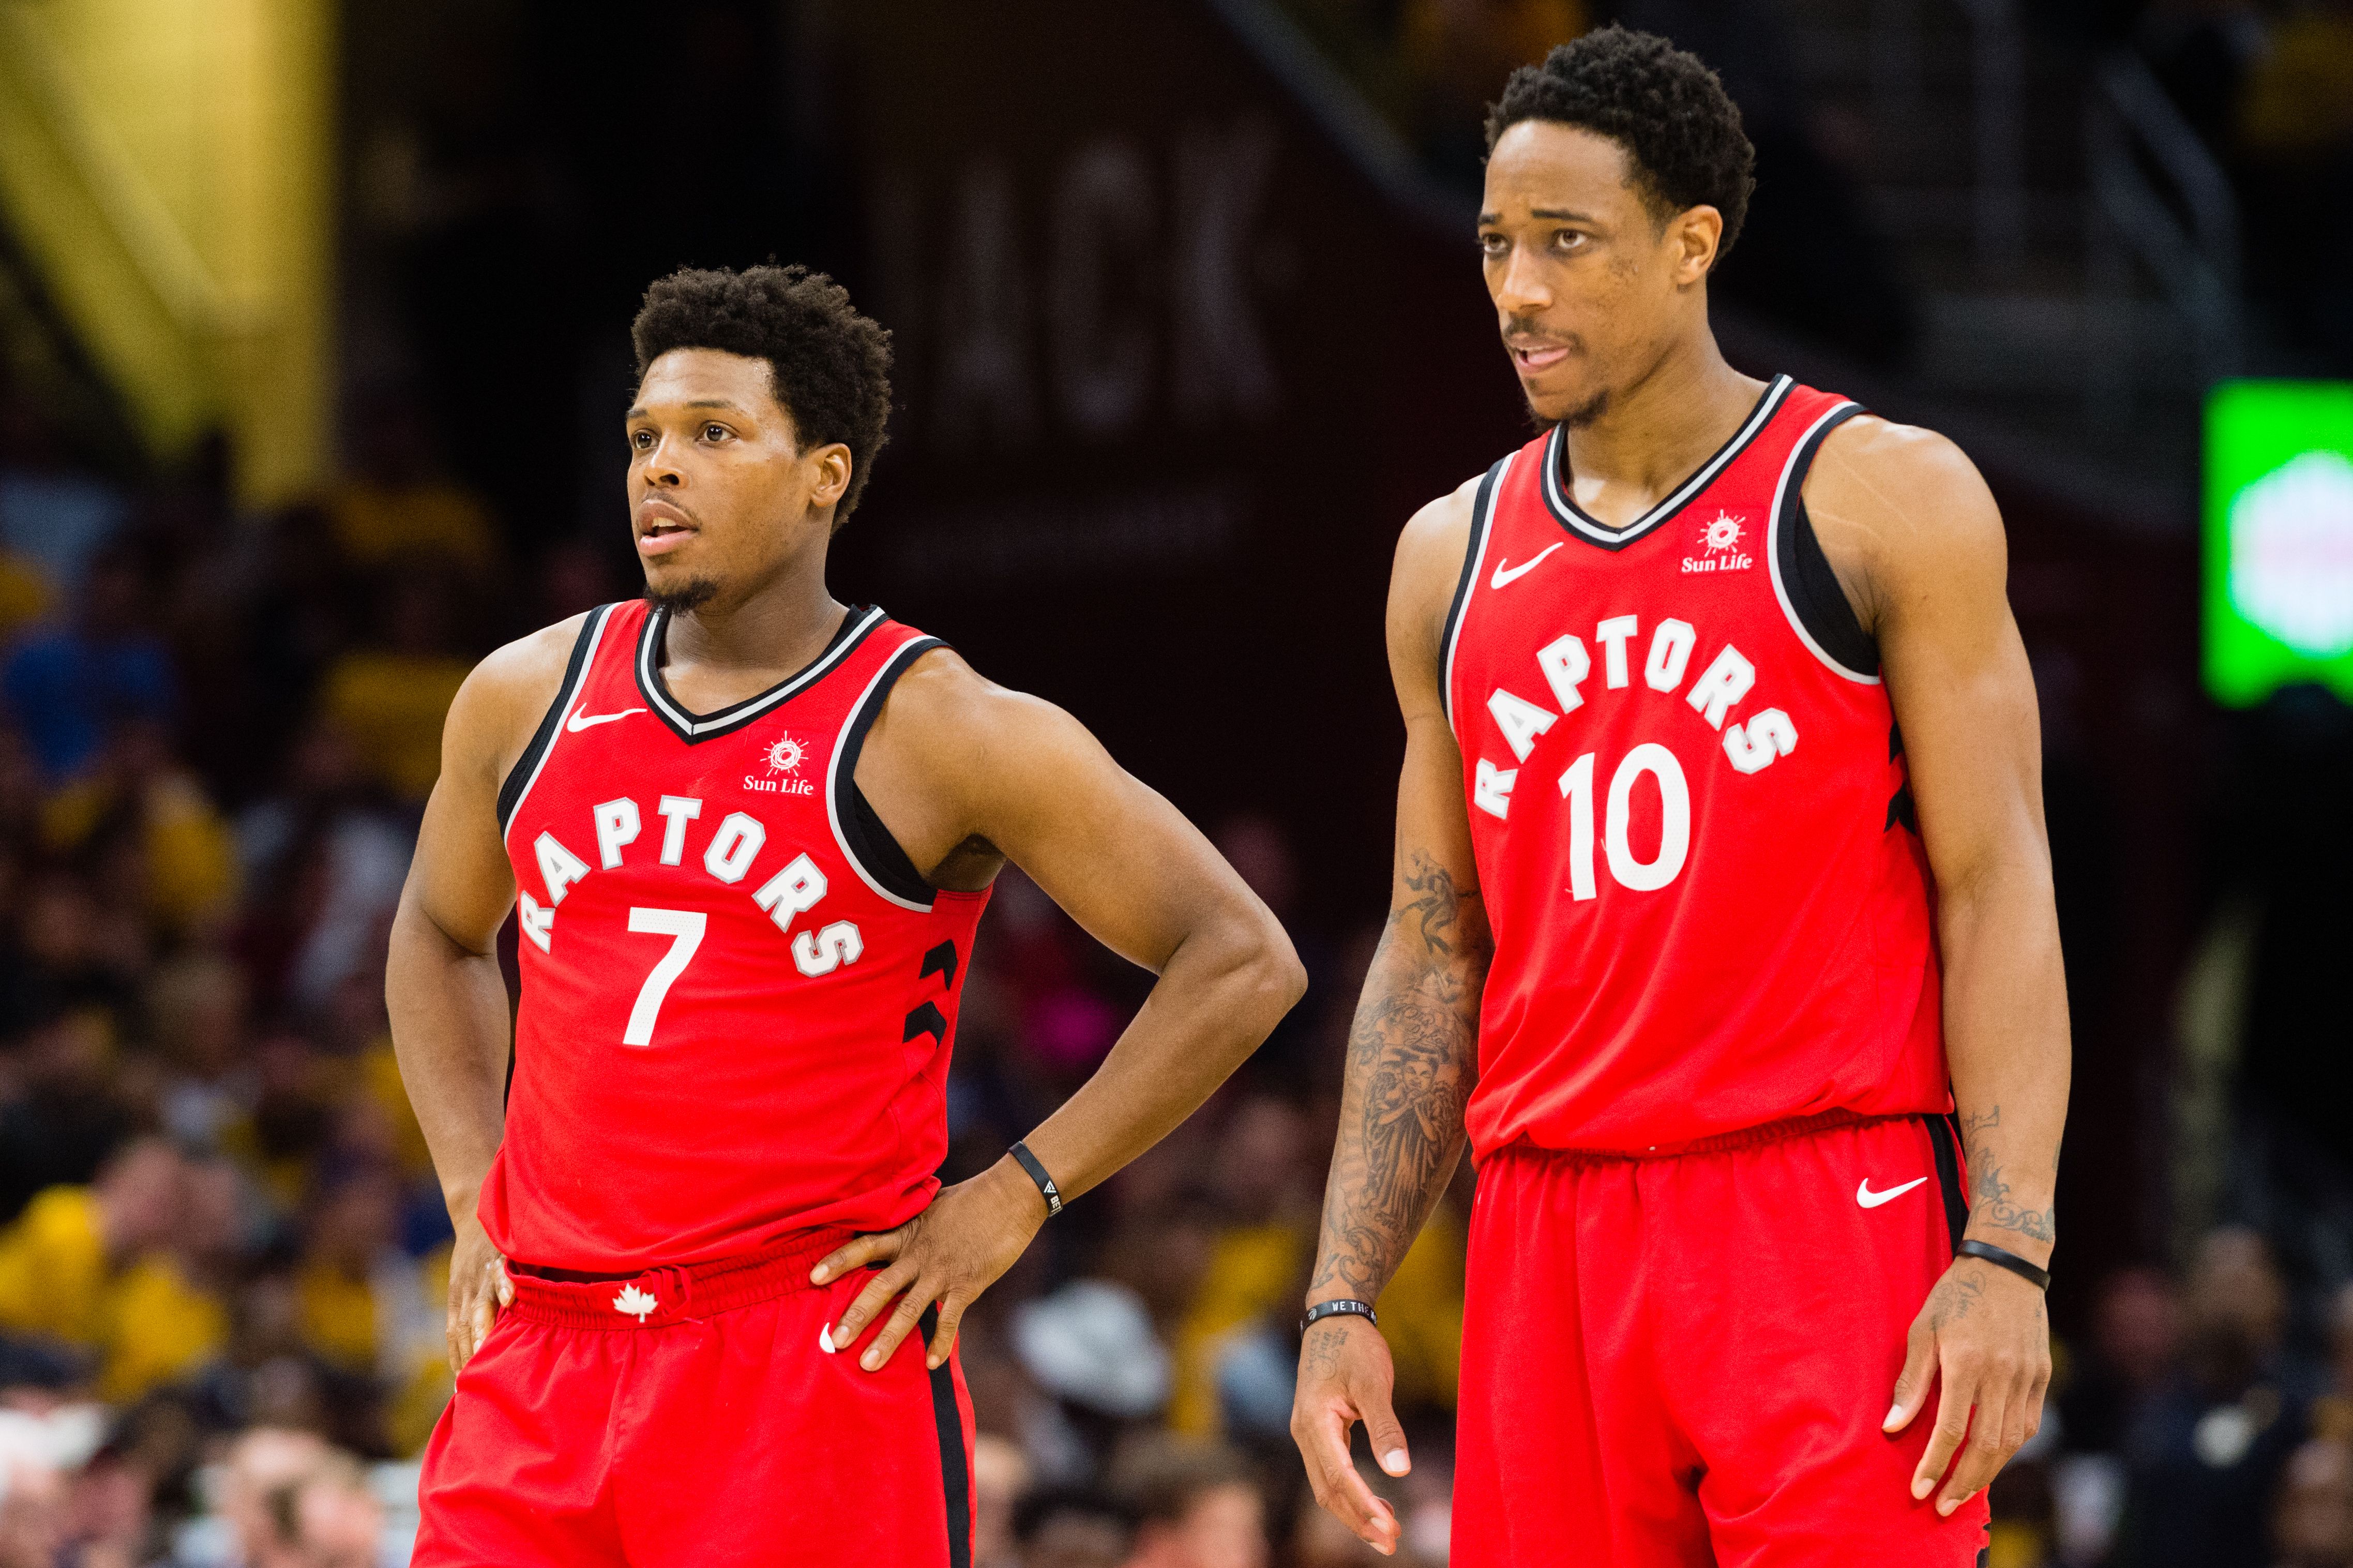 Kyle Lowry and DeMar DeRozan during their time together with the Raptors